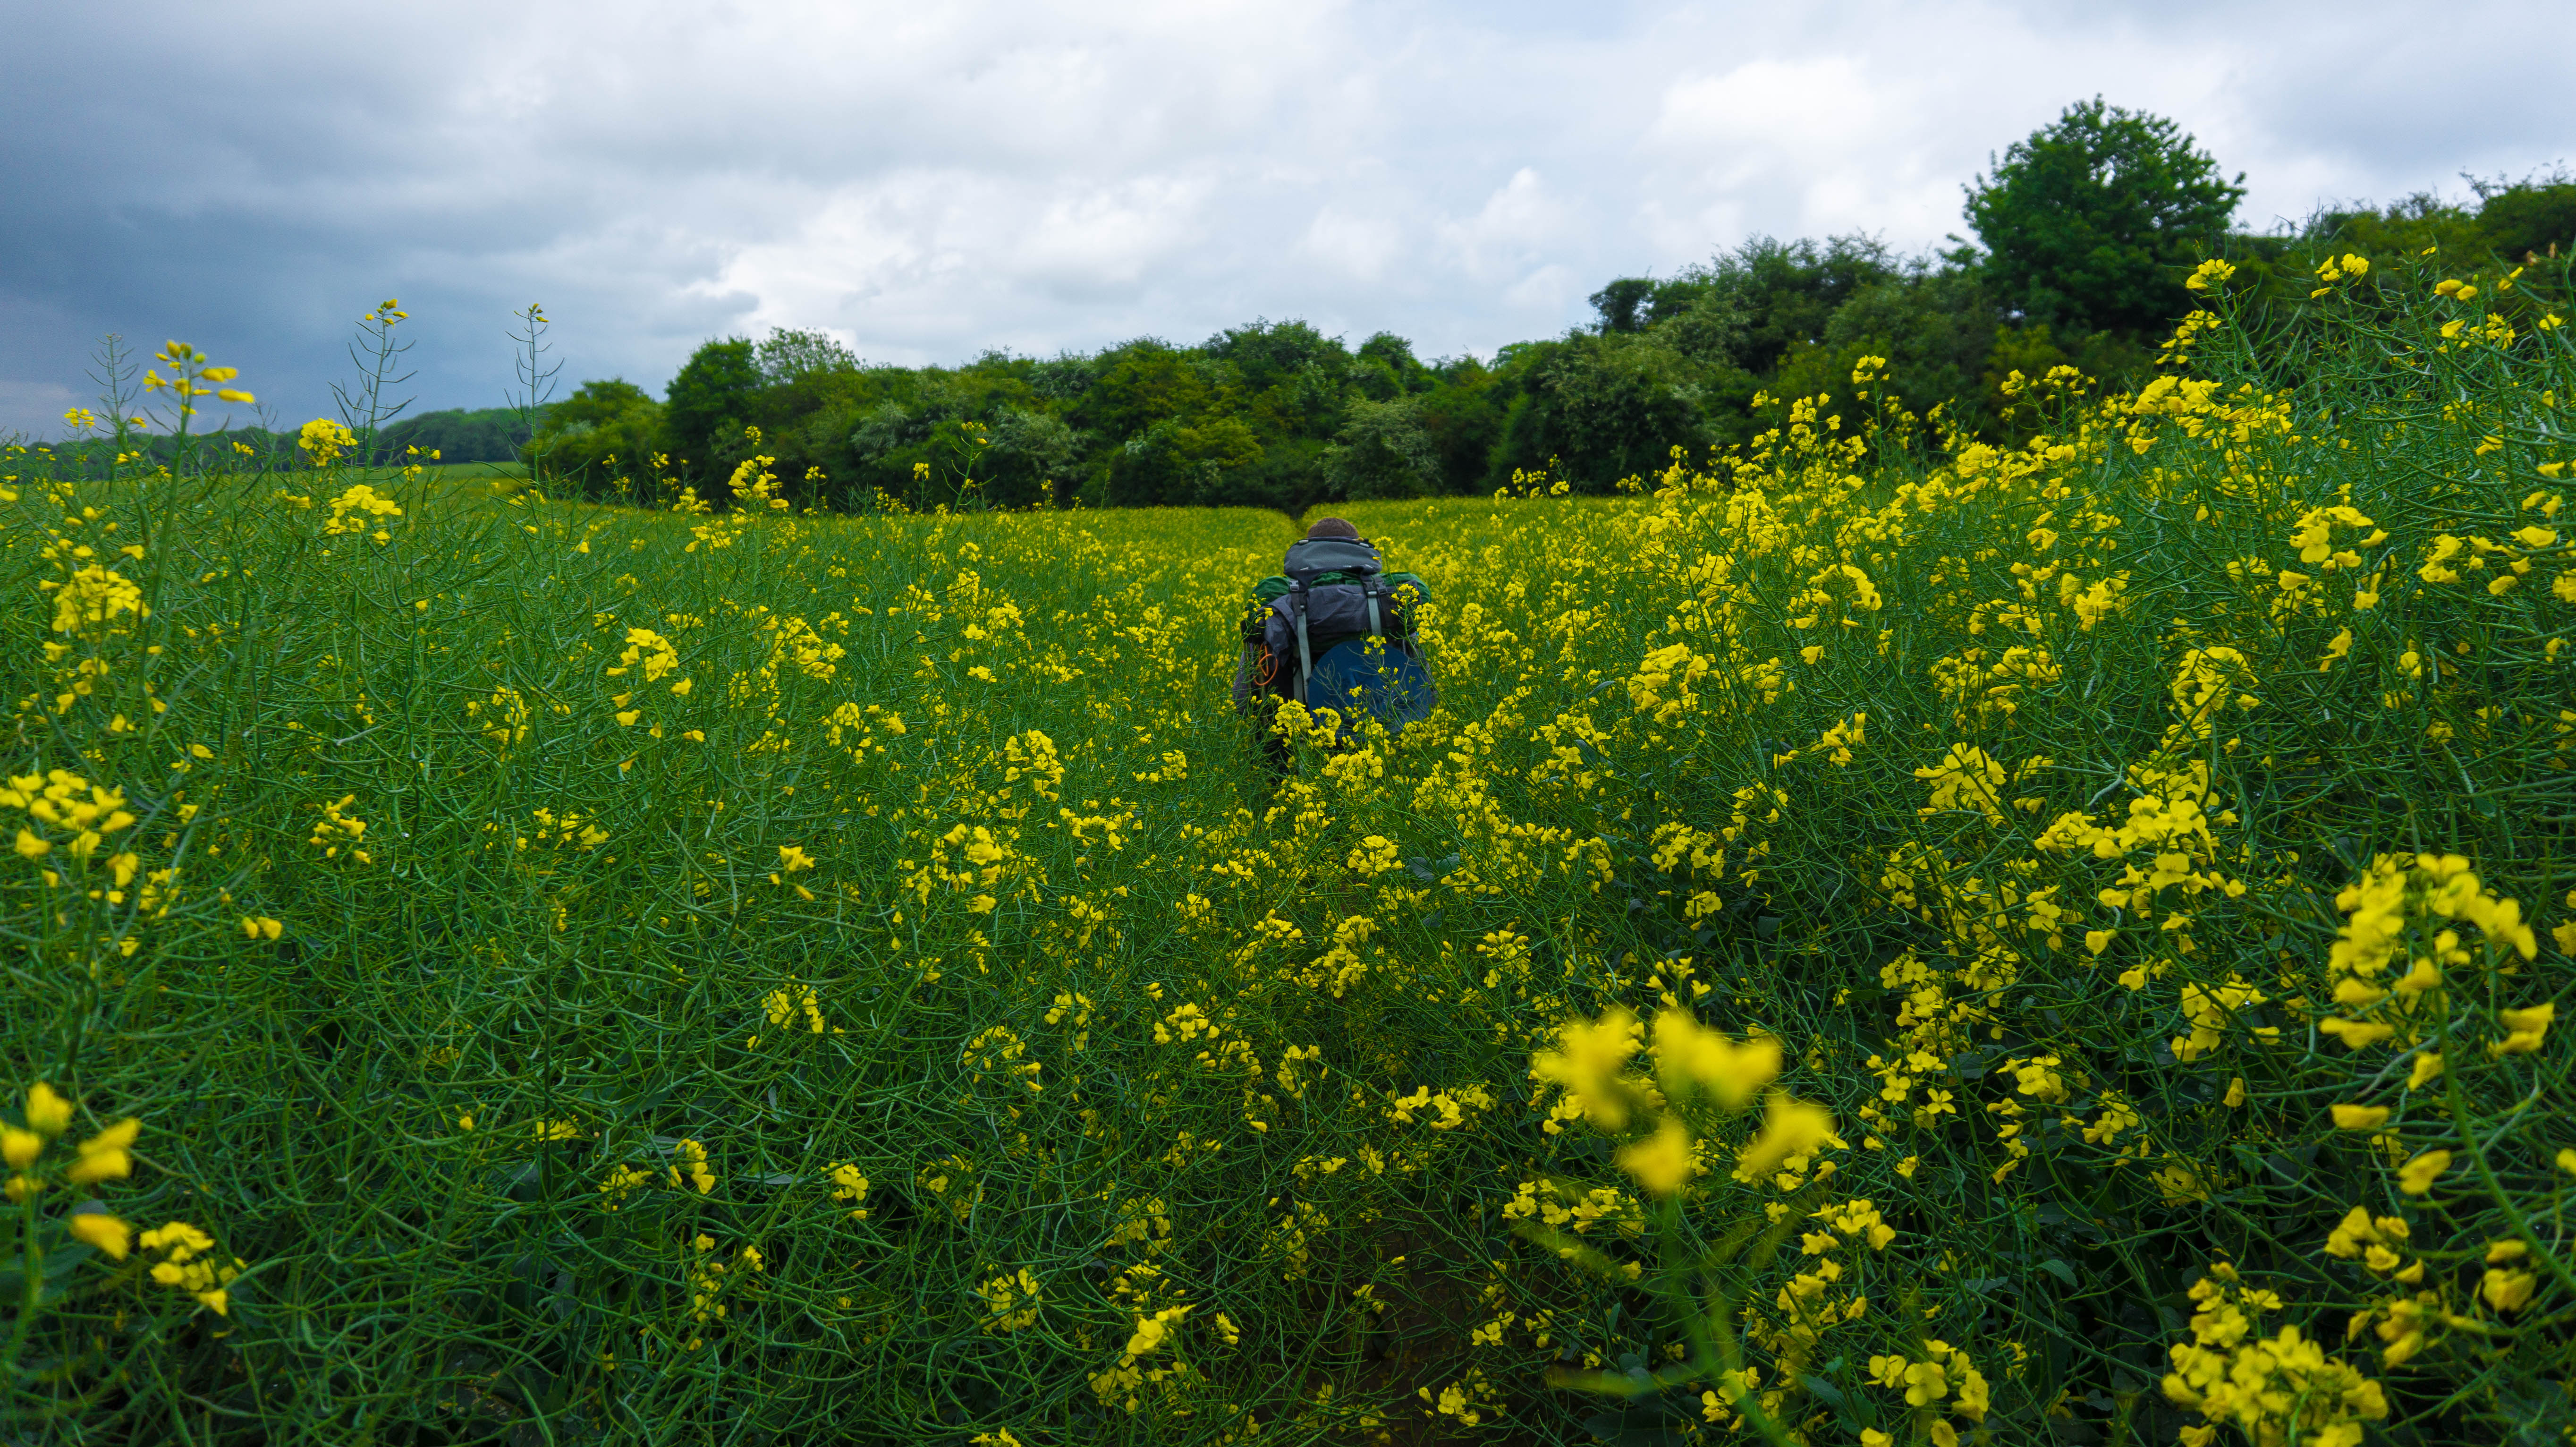 Canterbury to Dover | More rapeseed fields on Via Francigena